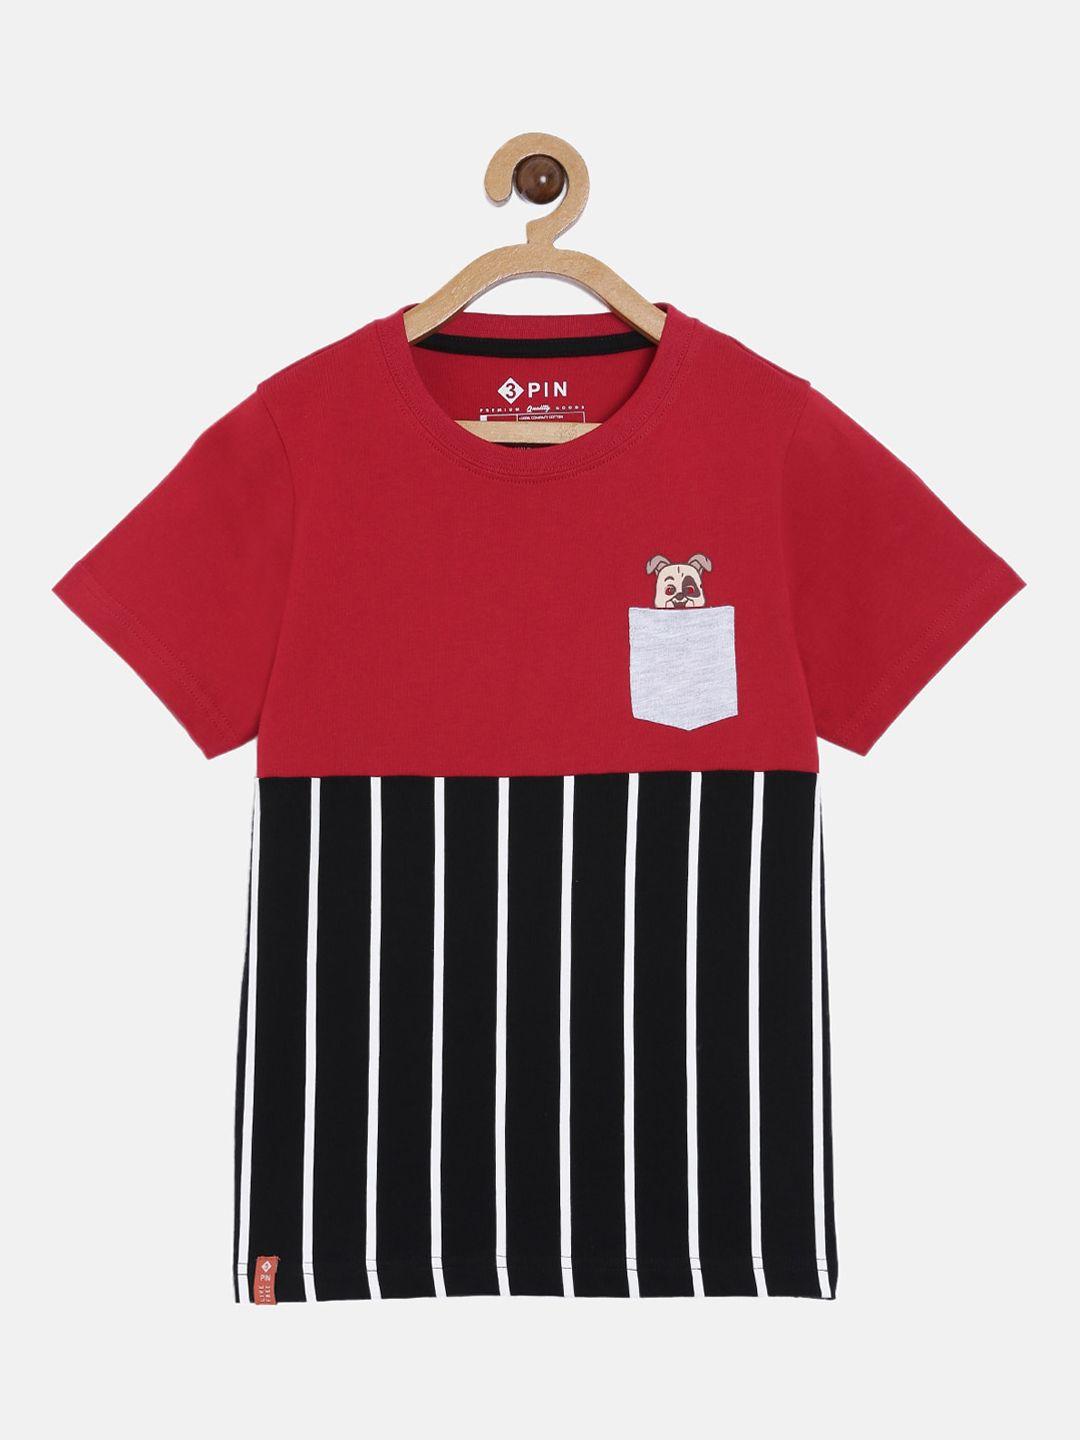 3pin boys red striped round neck t-shirt